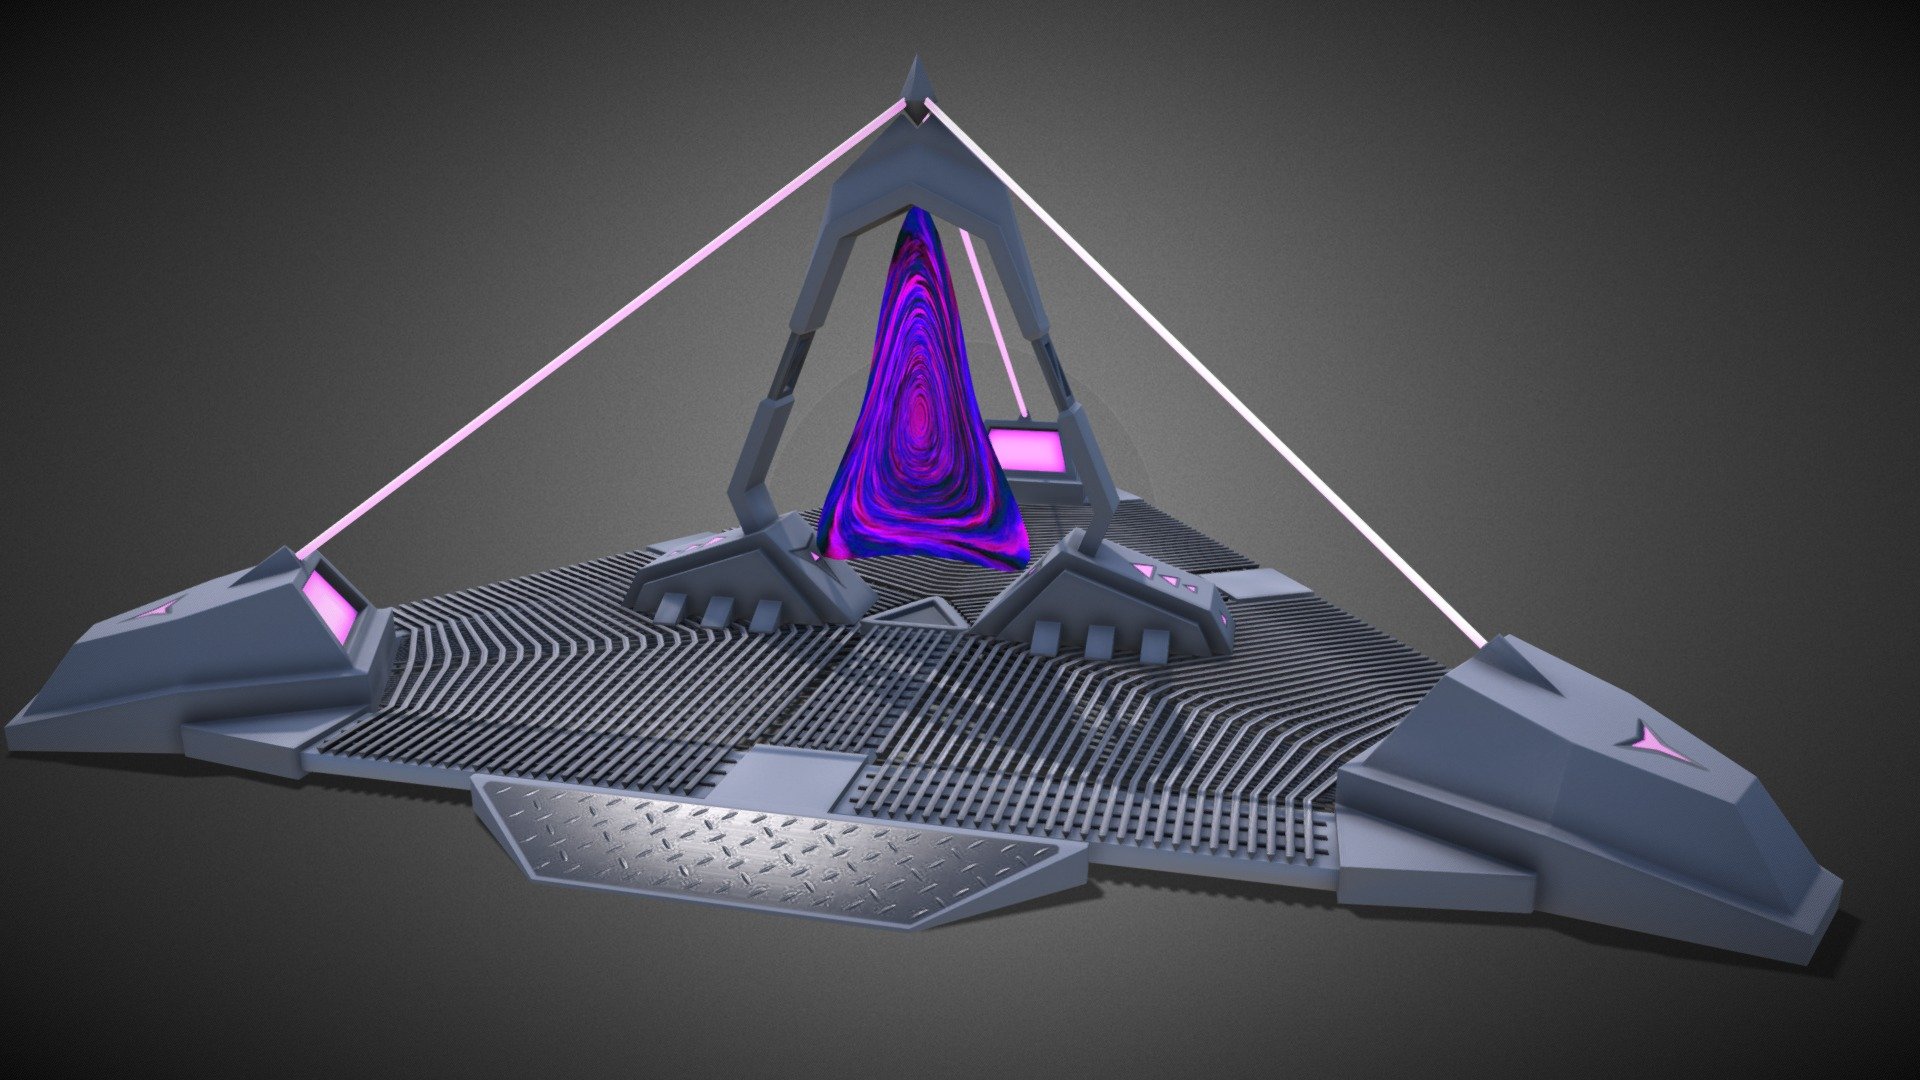 This hard surface portal is the first of three exploring shape language in design. It is loosely inspired by games such as Doom: Eternal. Most of the elements in this design are triangular. The warp tunnel of this portal was animated at the texture level.

Find out more on my socials: Chrismartinartist

Polys: 3127
Tris: 5880
Verts: 3280 - Triangle Portal - 3D model by Chrismartinartist 3d model